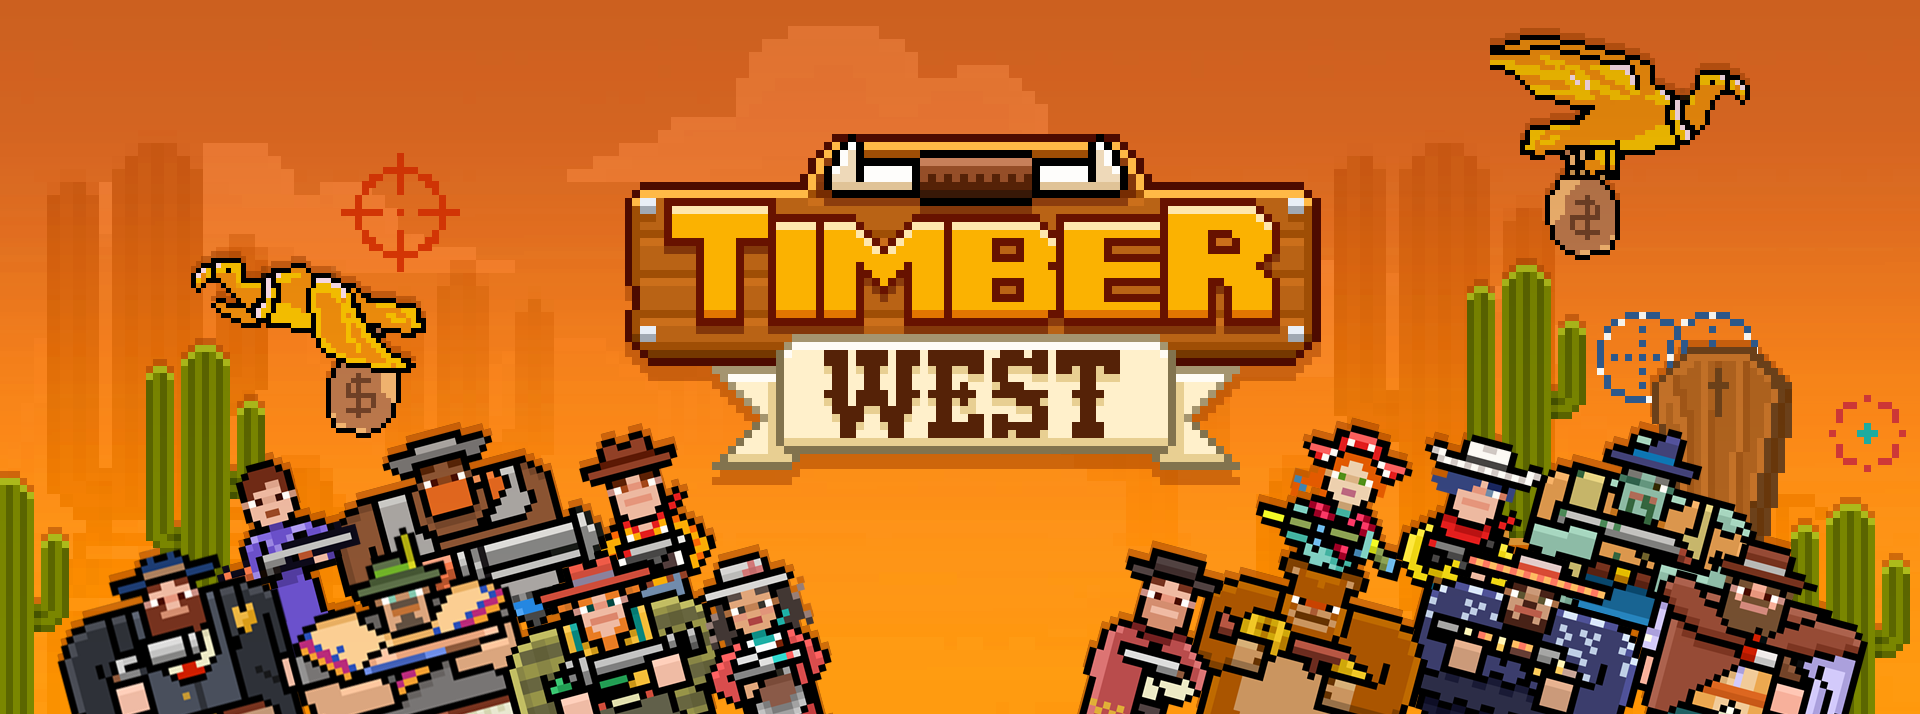 Timber West